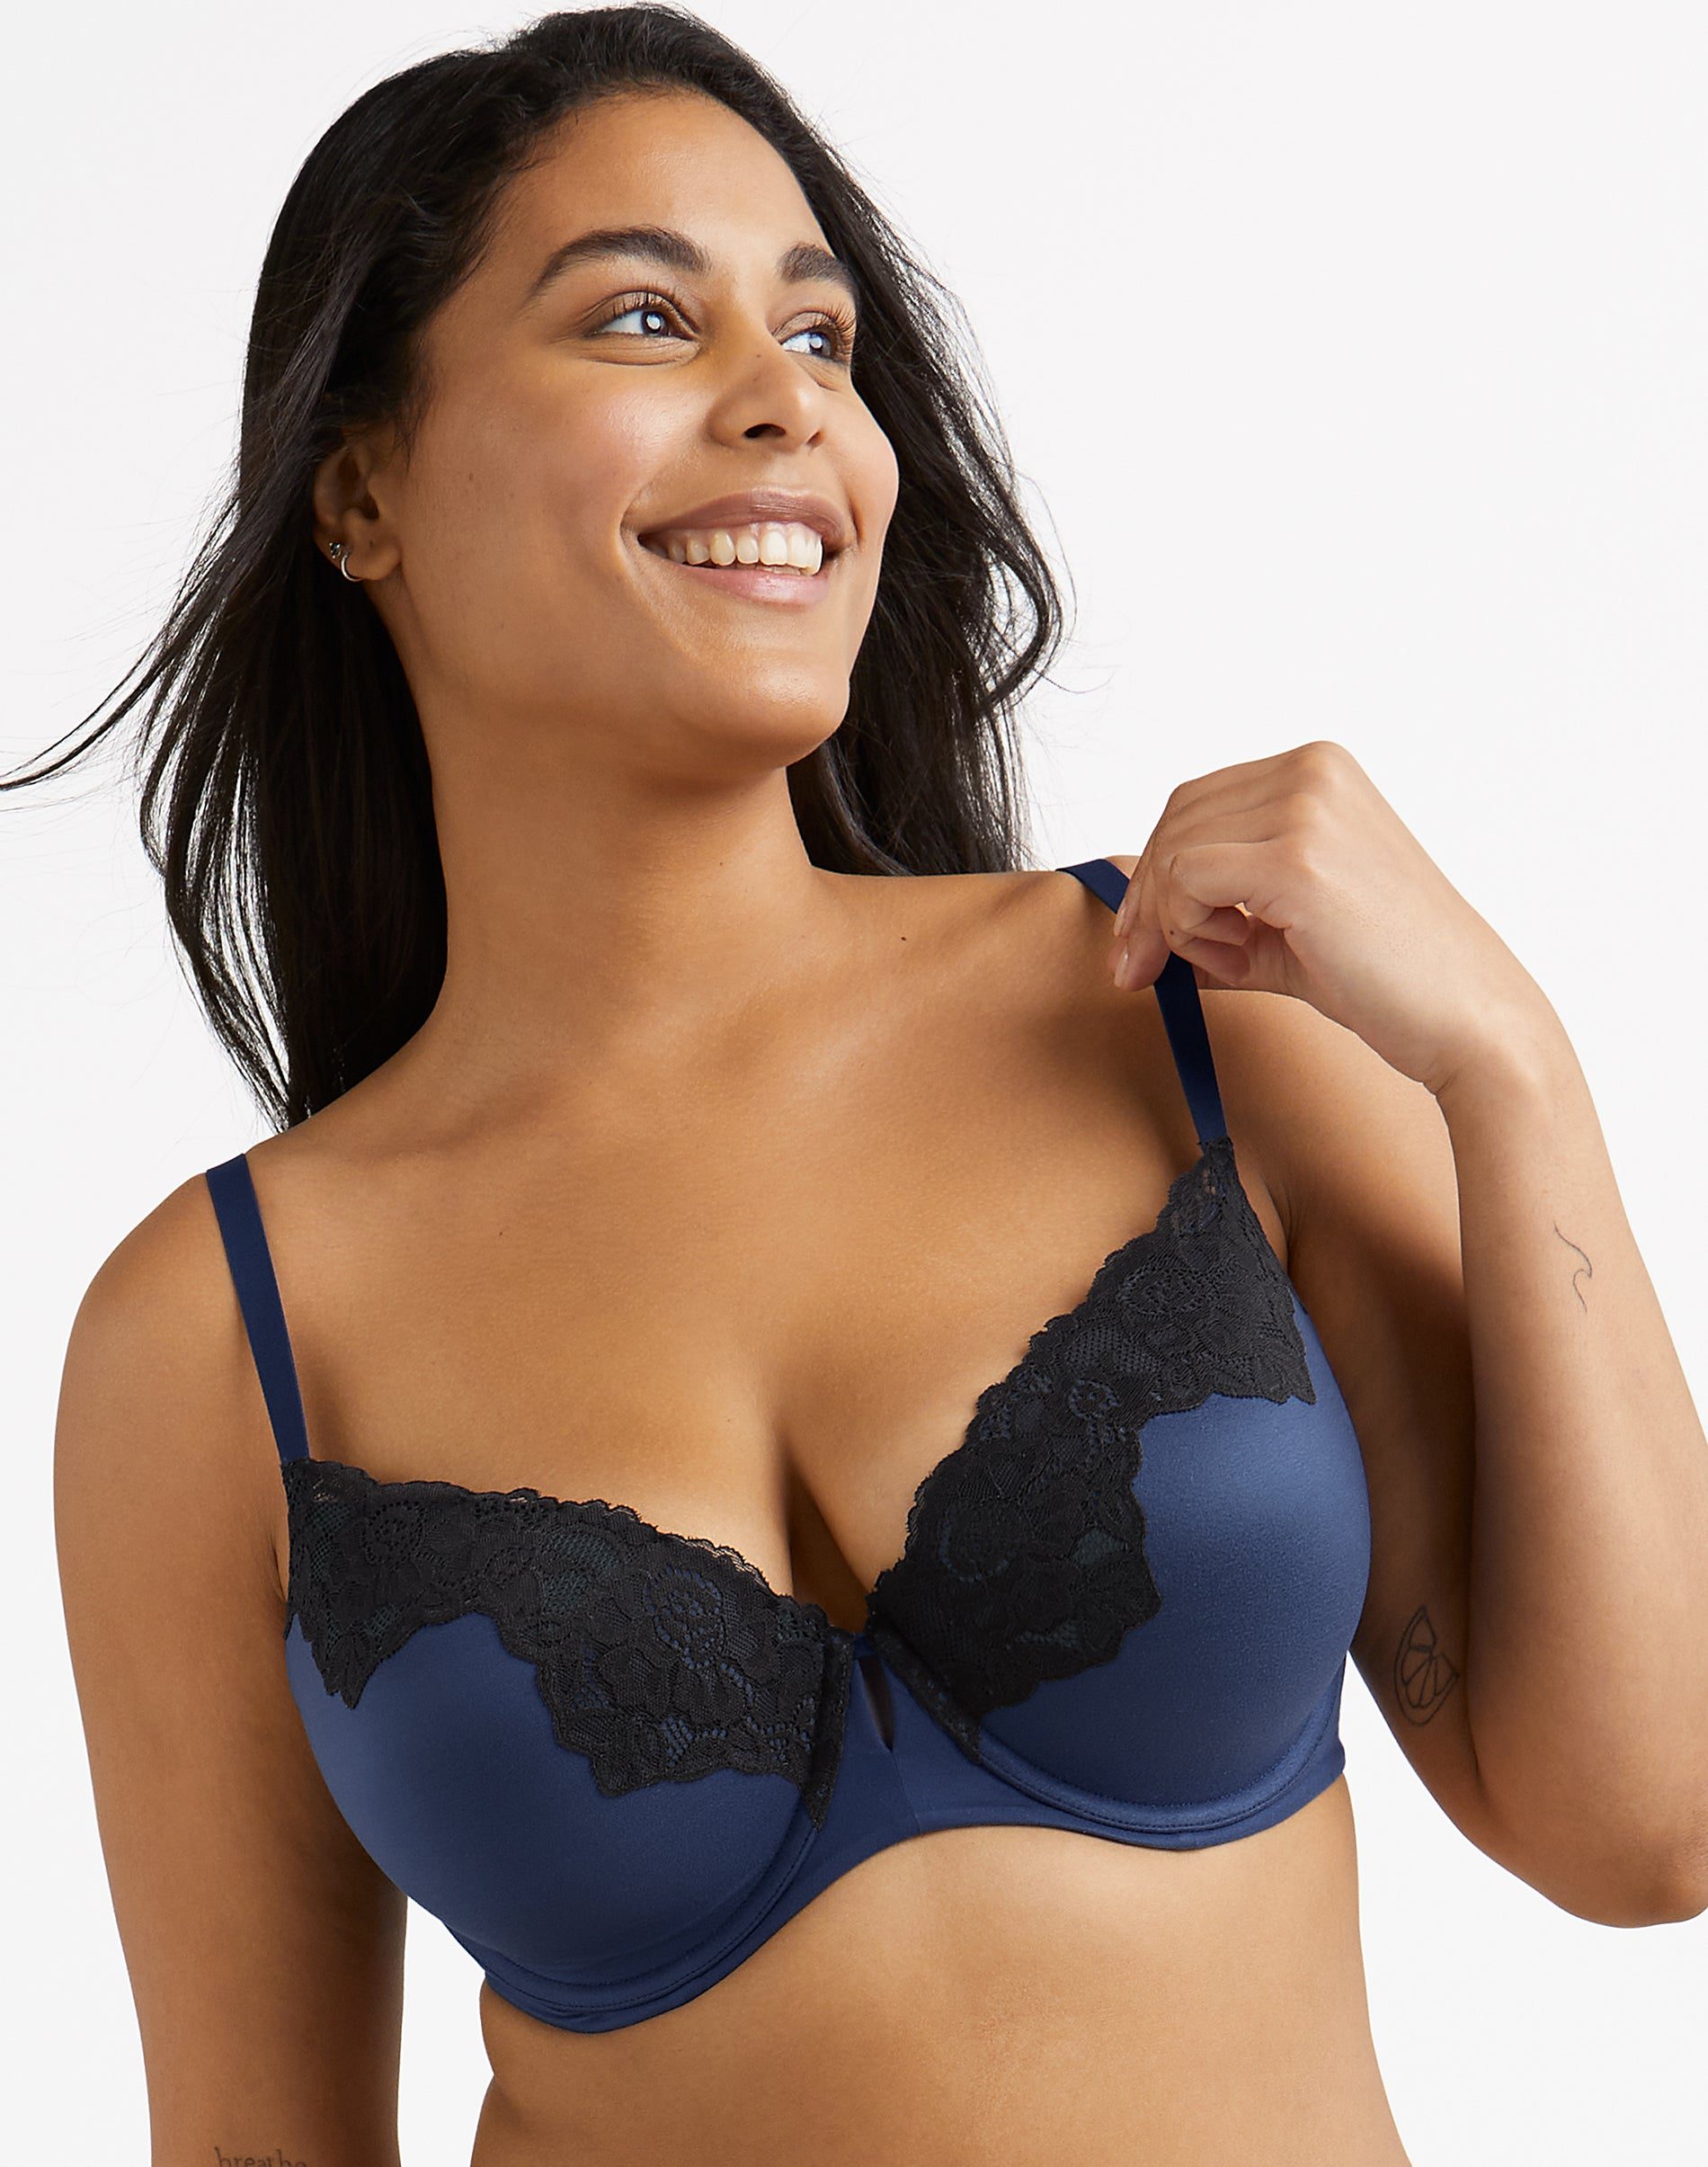 Self Expressions by Maidenform Lace Underwire Bra, 38D, Navy/Black